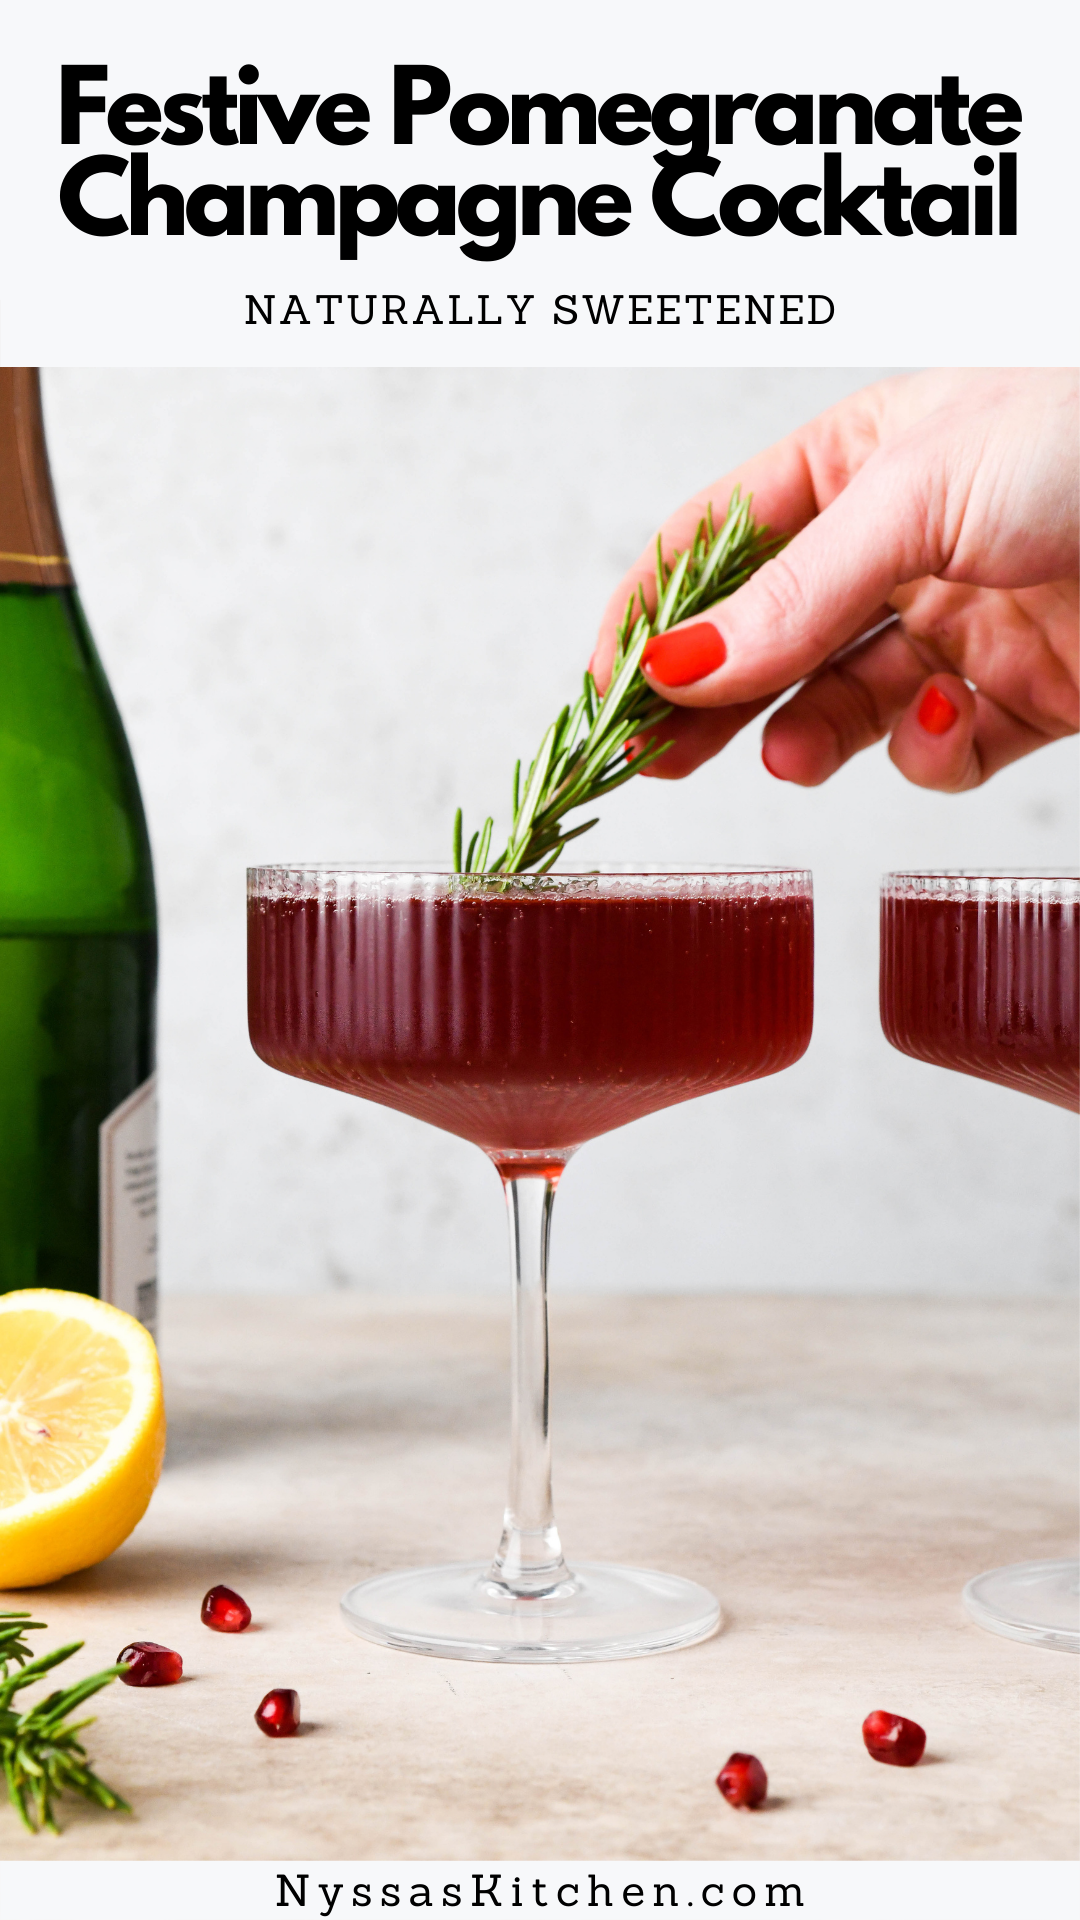 This festive pomegranate champagne cocktail is the perfect drink to serve for your holiday celebrations! Made with vodka or gin, pomegranate juice, lemon juice, maple syrup, and sparkling champagne. Bright, bubbly, and so delicious!